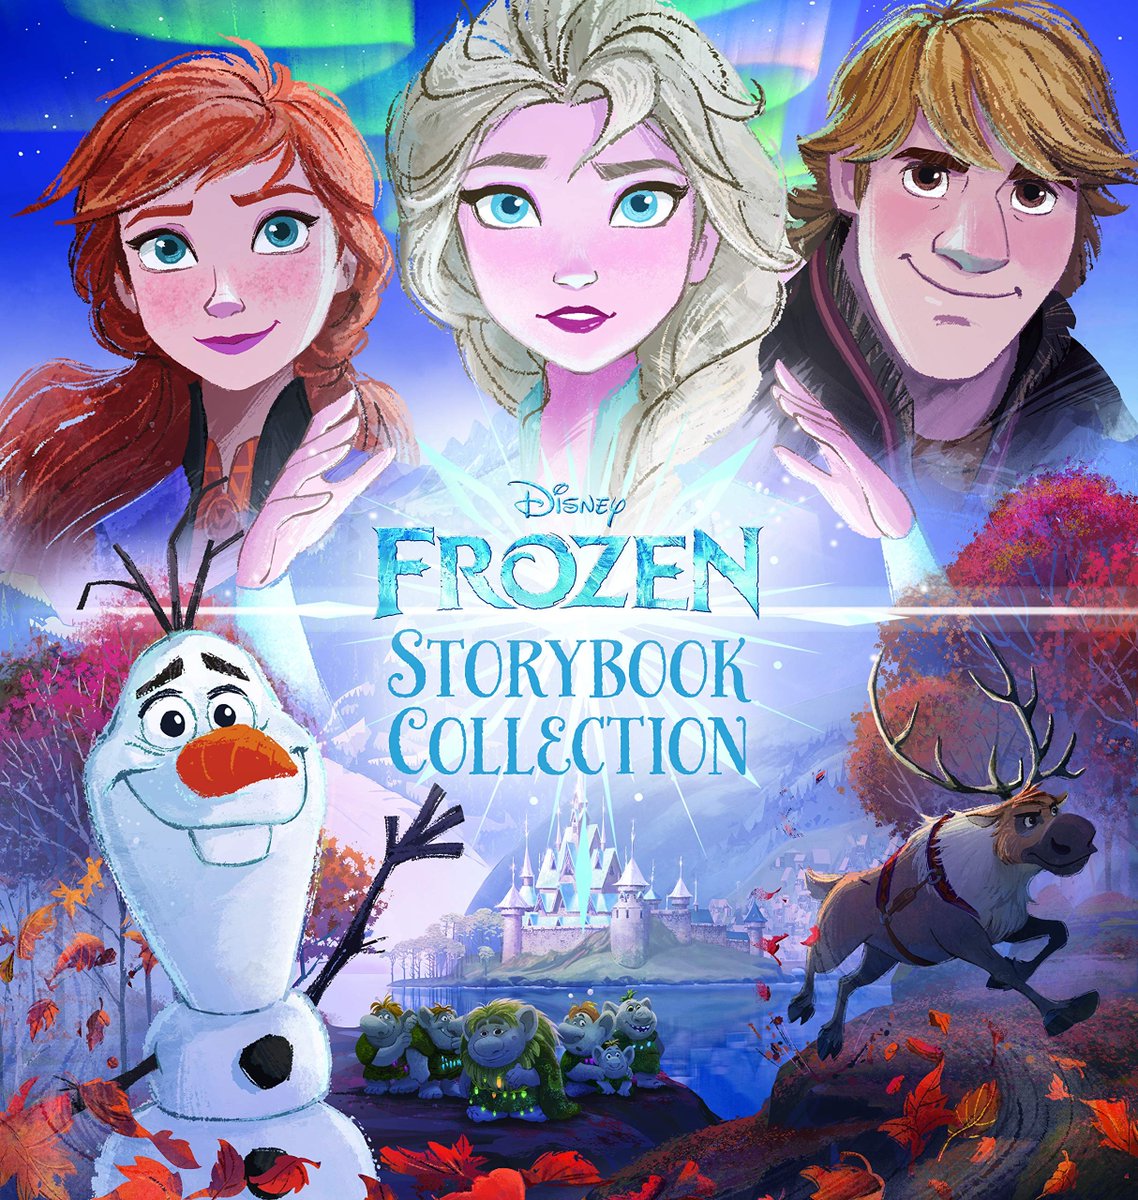 about so called " #frozen storybook collection"& its derivative"frozen storybook collection" US verLIGHT BLUE cover, 304p, 2016ISBN-10: 1484758730ISBN-13: 978-1484758731 https://www.amazon.com/dp/1484758730/ 304p, 2019ISBN-10: 1368051774ISBN-13: 978-1368051774 https://www.amazon.com/dp/1368051774/ 